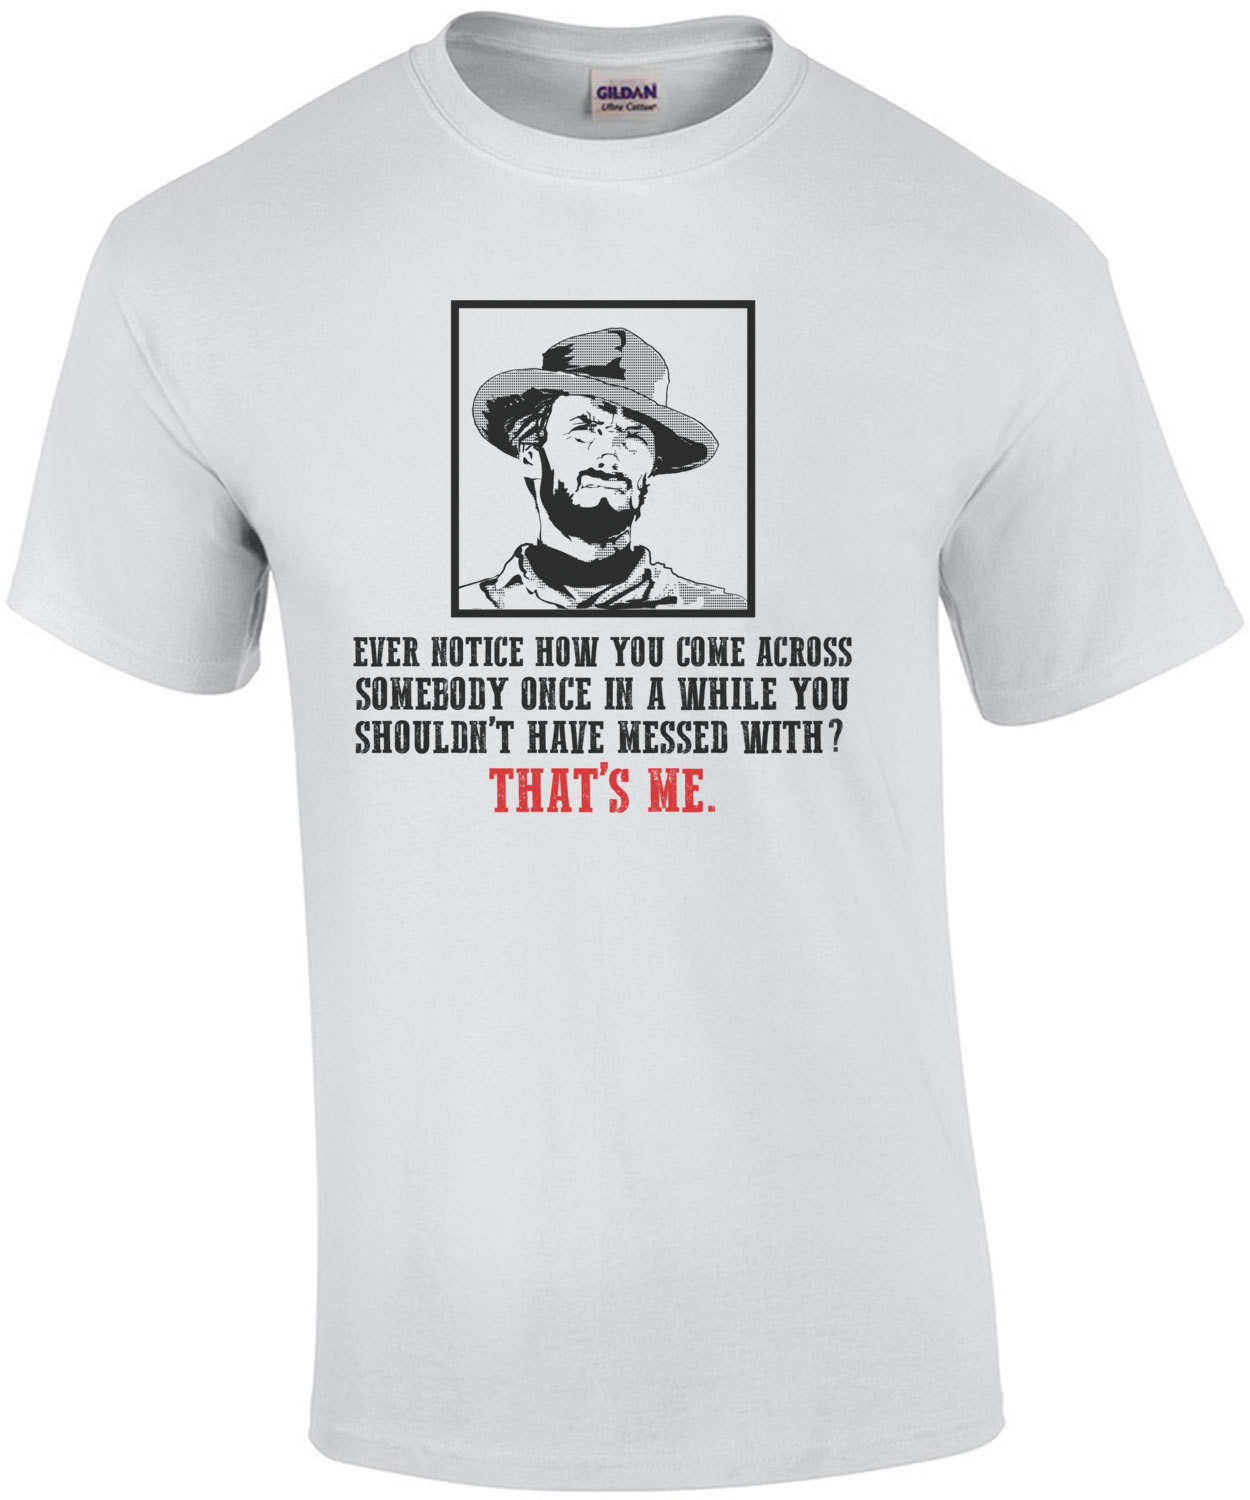 Clint Eastwood Quote Ever Notice How You Come Across Somebody Once In A While You Shouldnt Have Messed With Thats Me T-Shirt